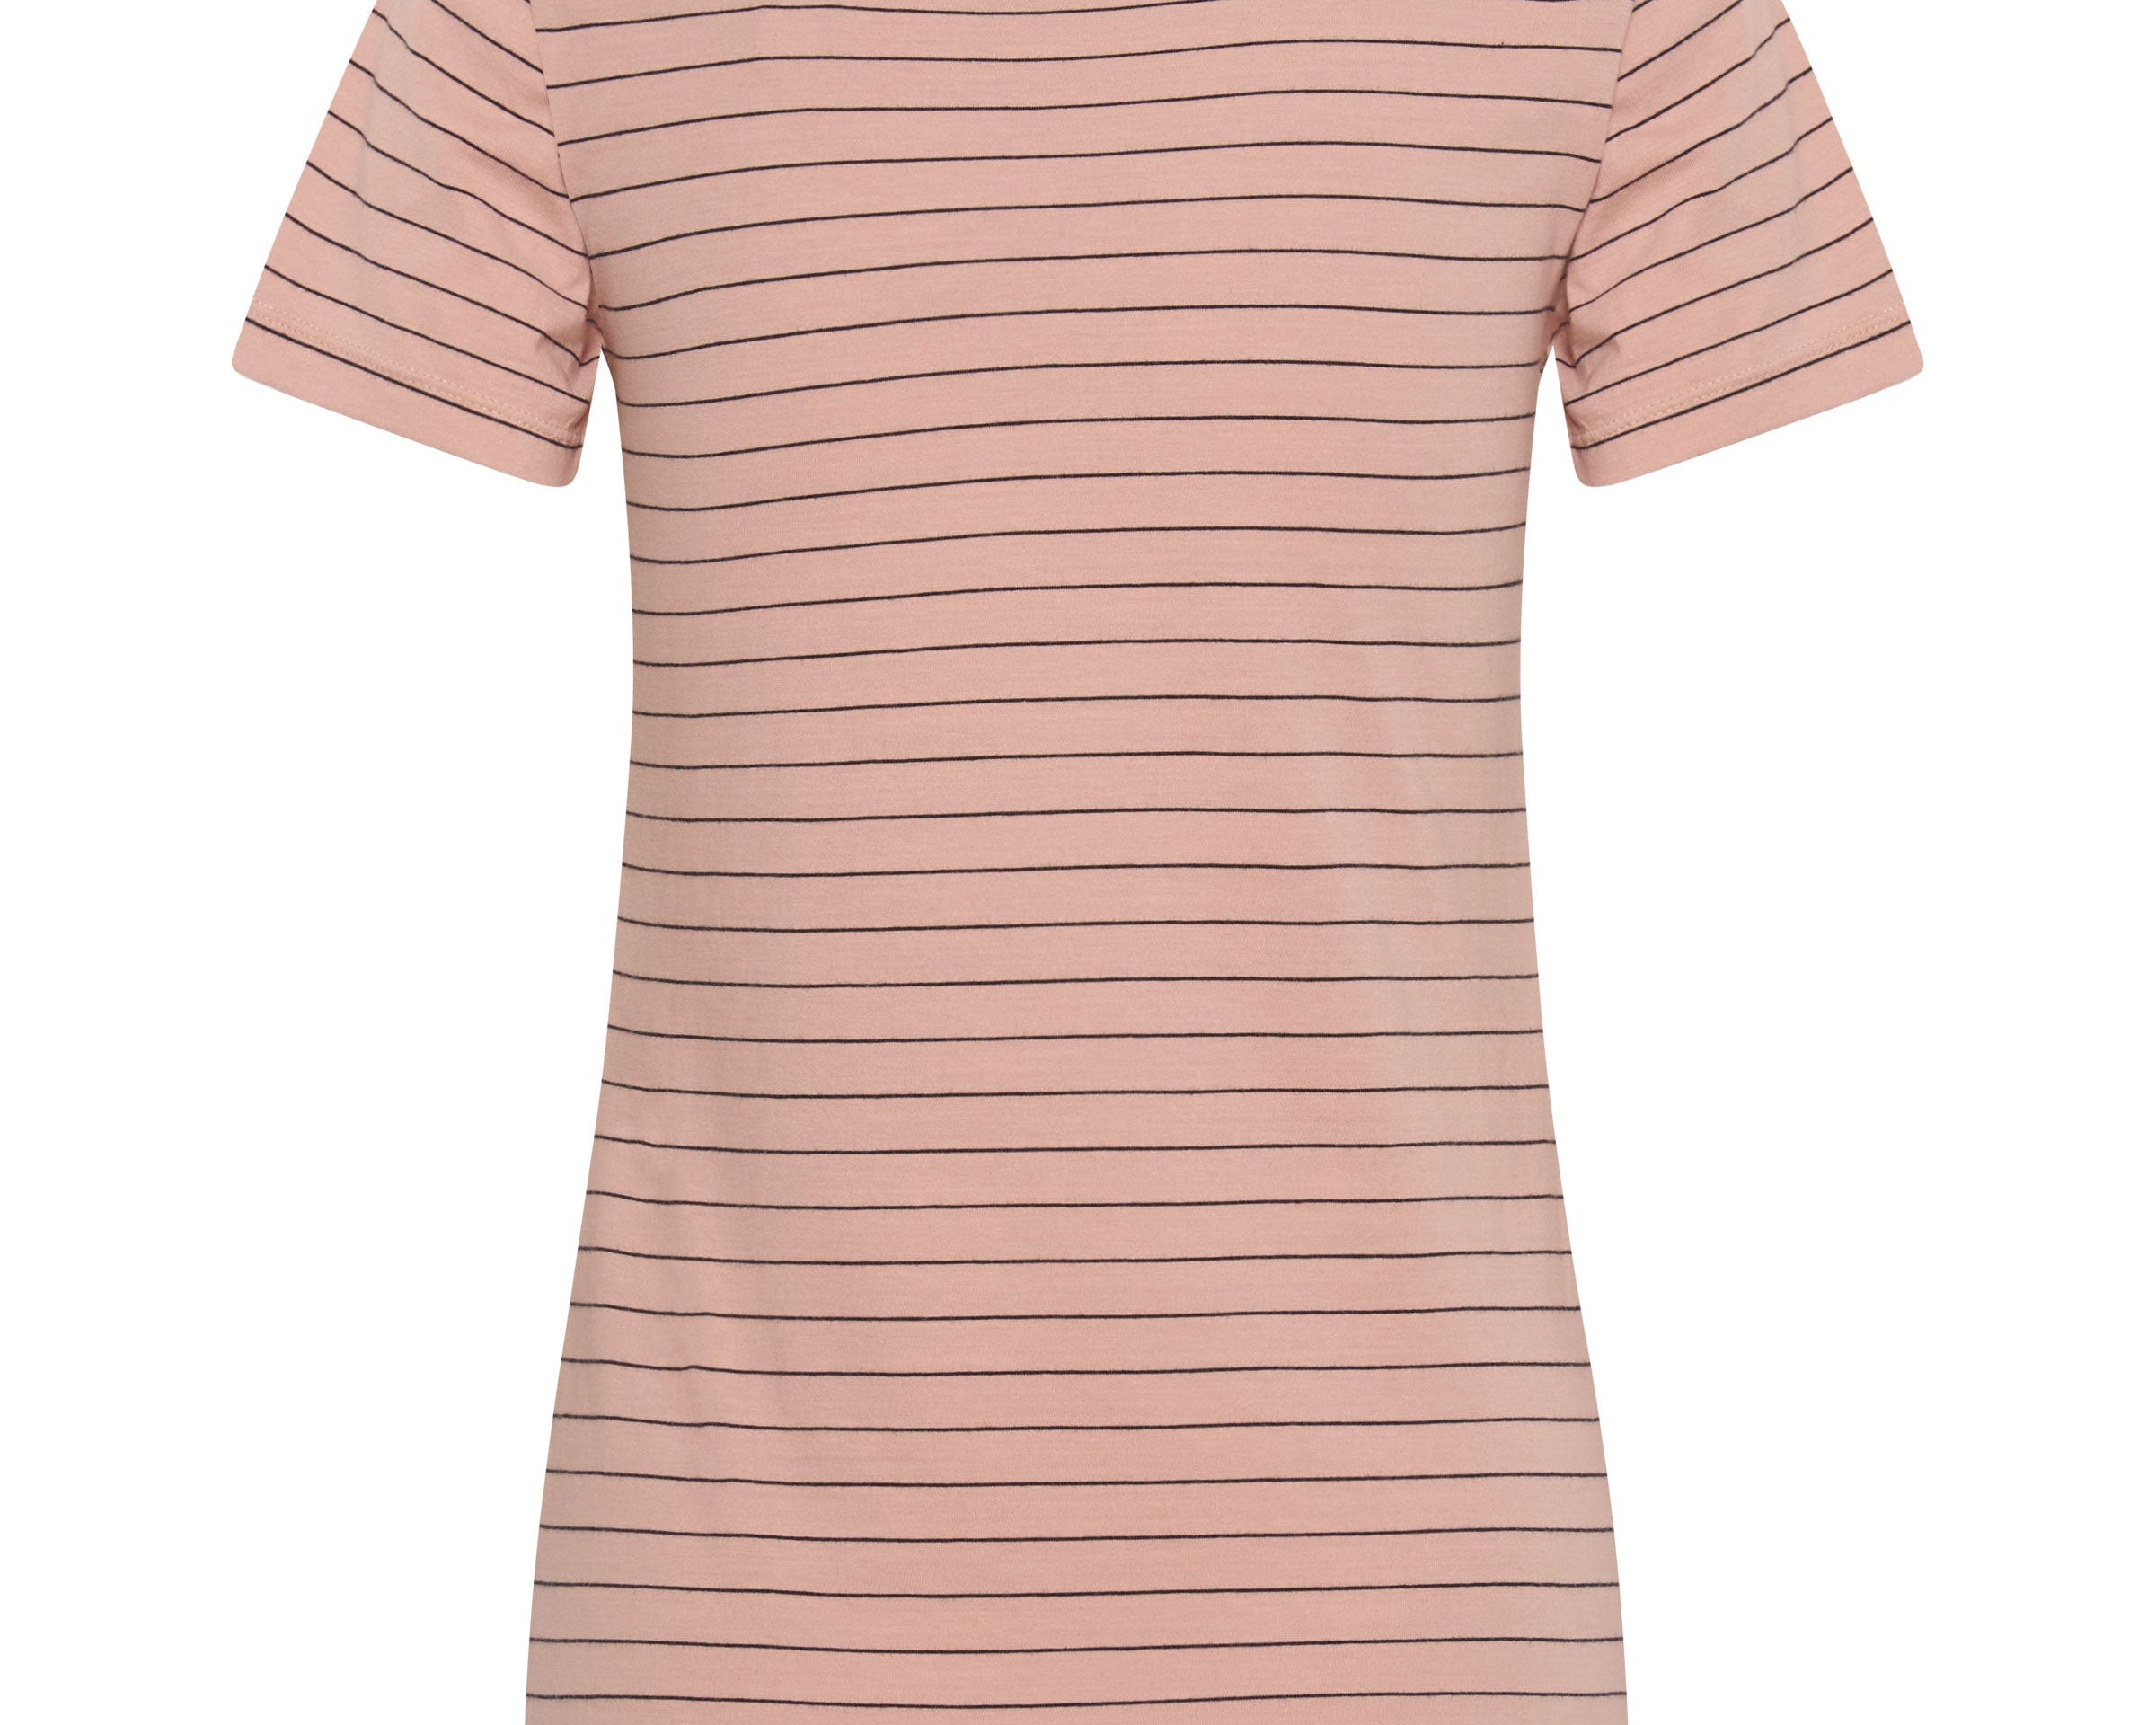 BOWER BIRD EMBROIDERED LOGO FITTED TEE PINK